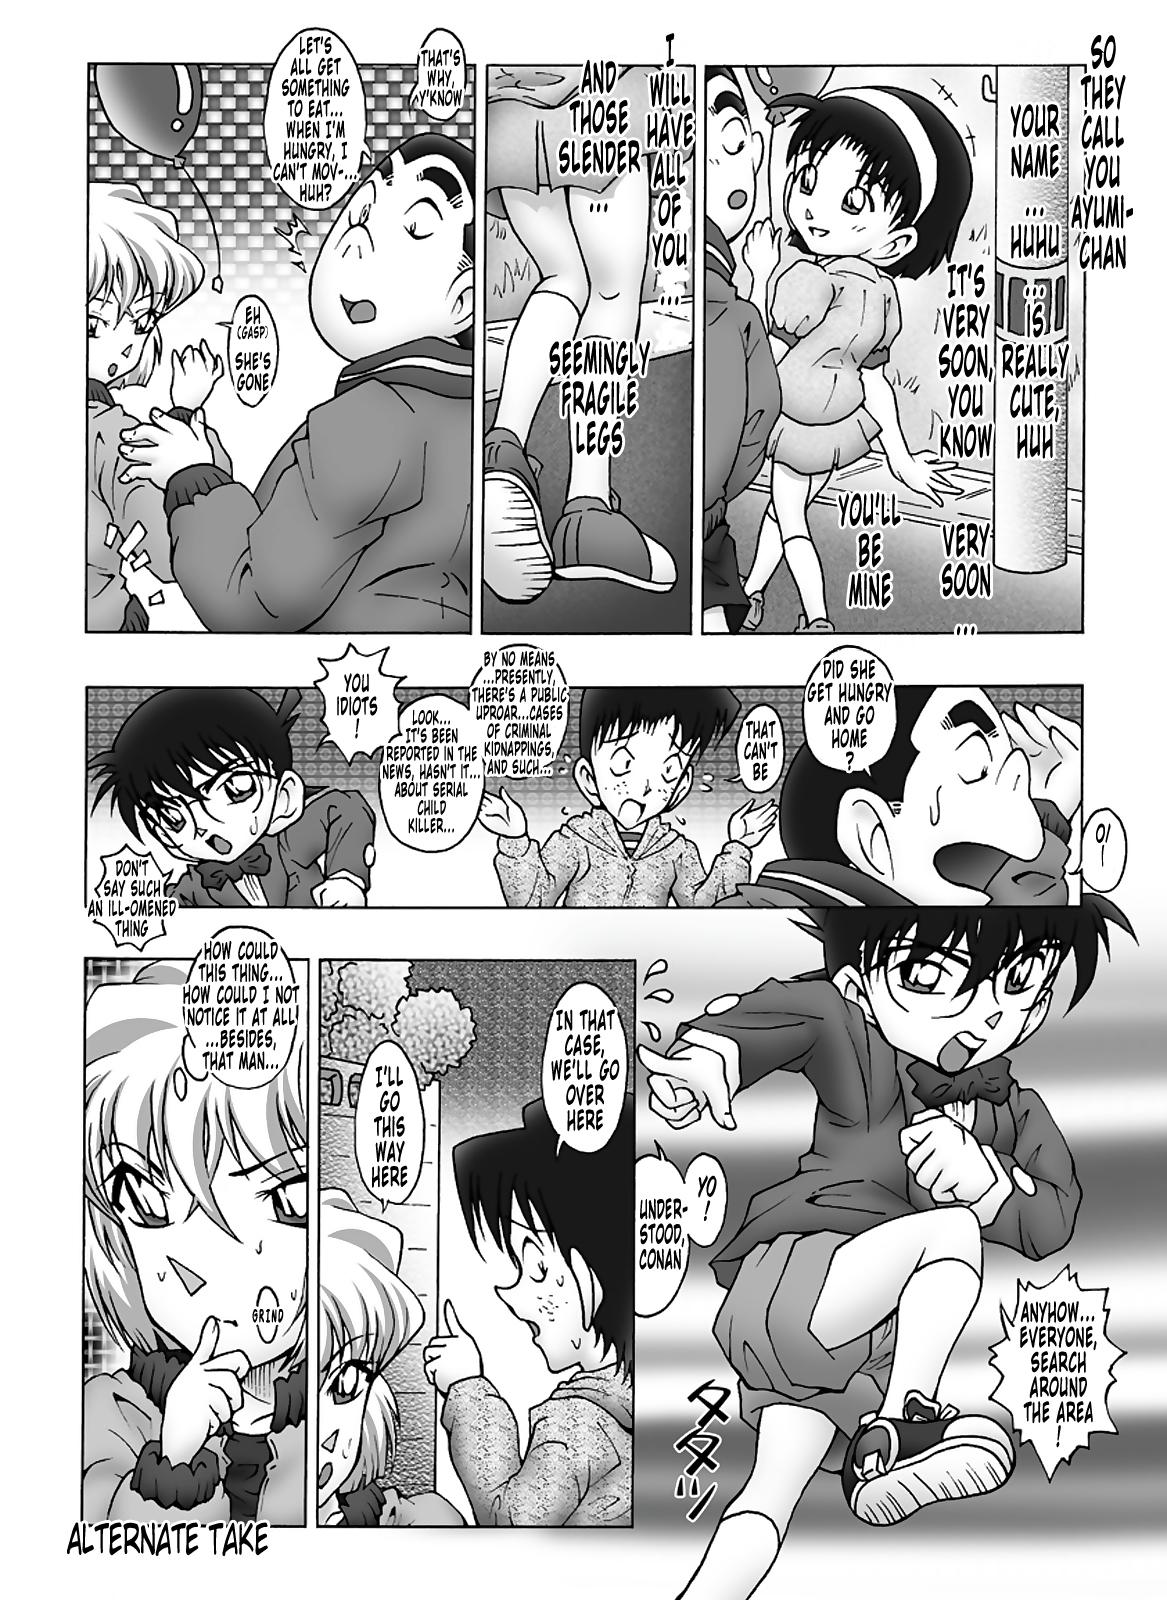 Bumbling Detective Conan - File 11: The Mystery Of Jack The Ripper's True Identity 22